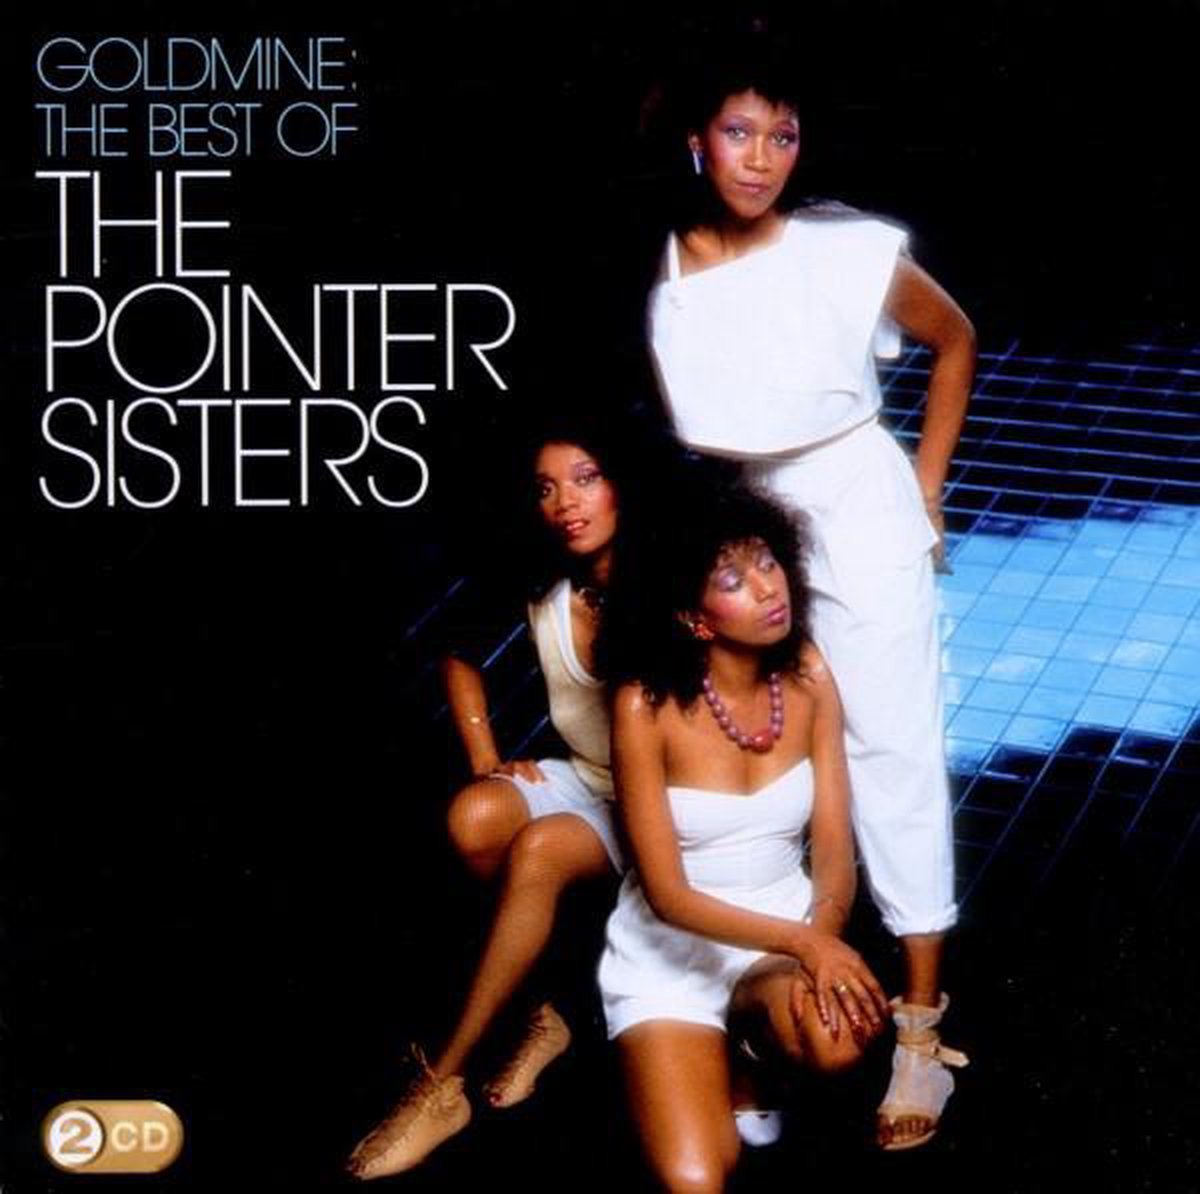 Goldmine: The Best Of - The Pointer Sisters